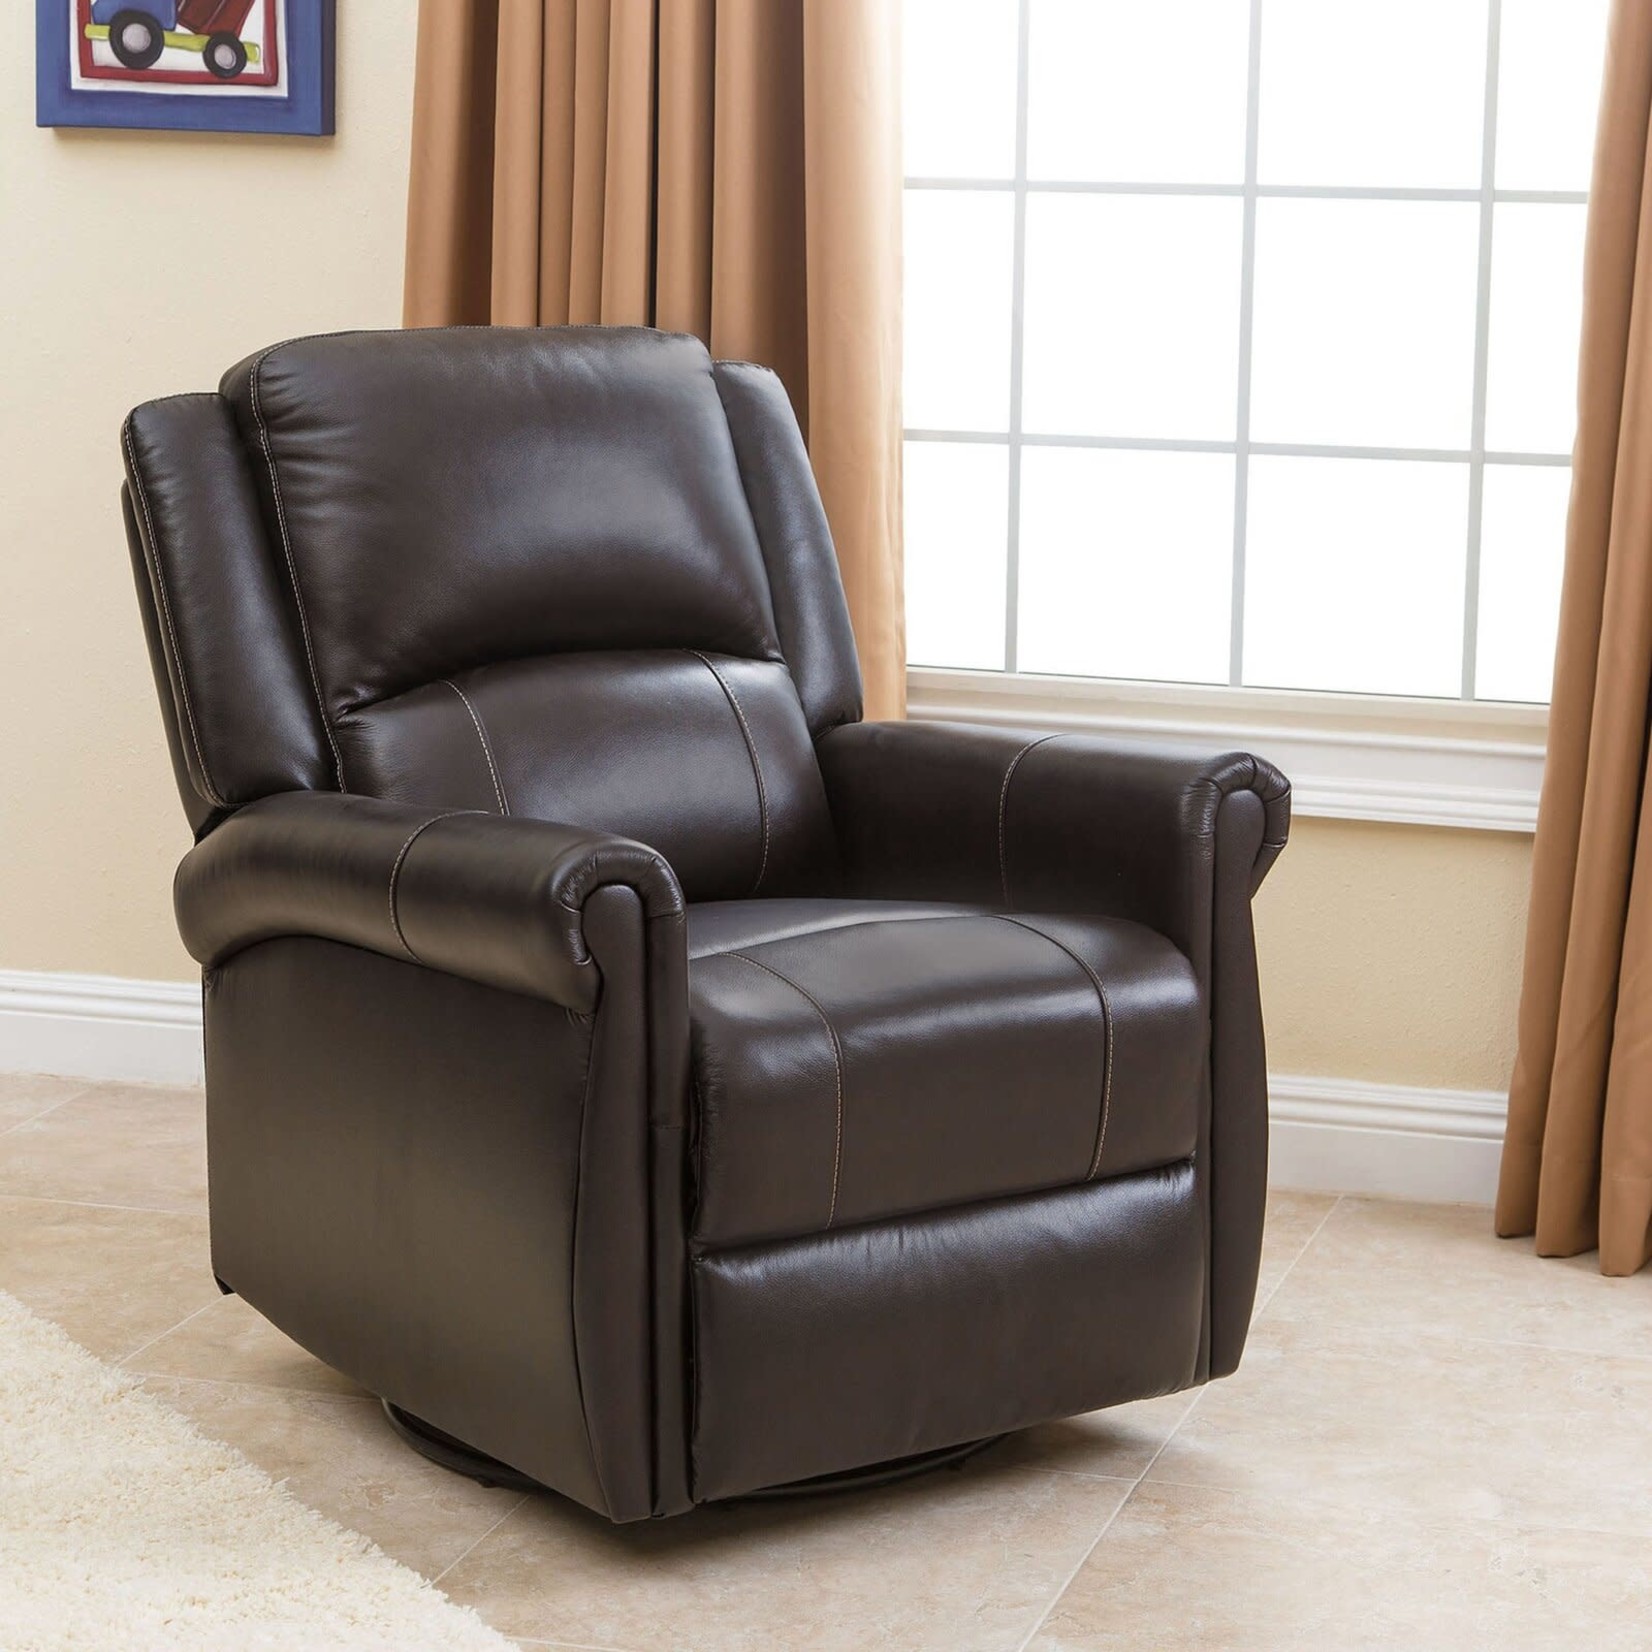 *35" Wide Neoma Faux Leather Manual Glider Standard Recliner